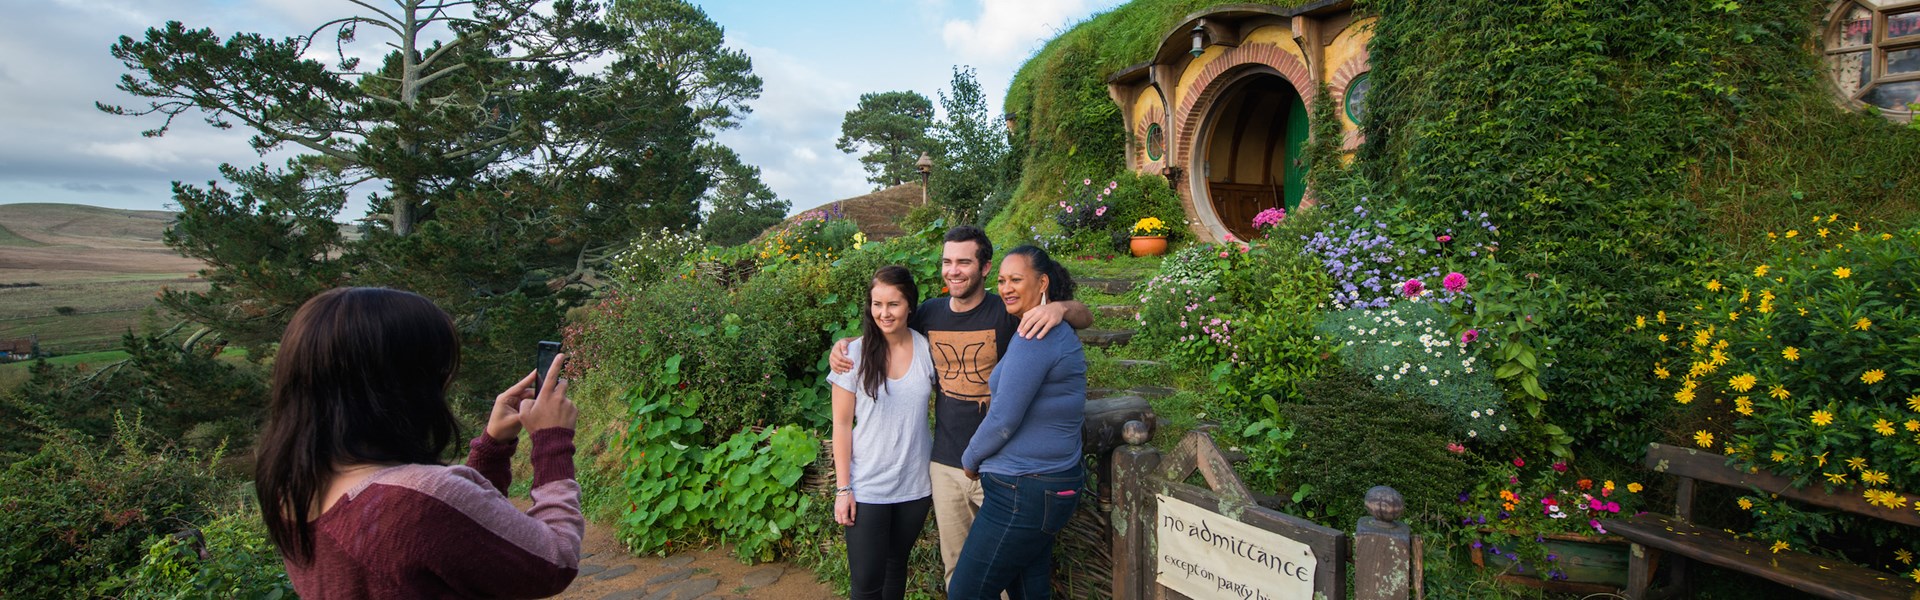 Bag End photo opportunity. 